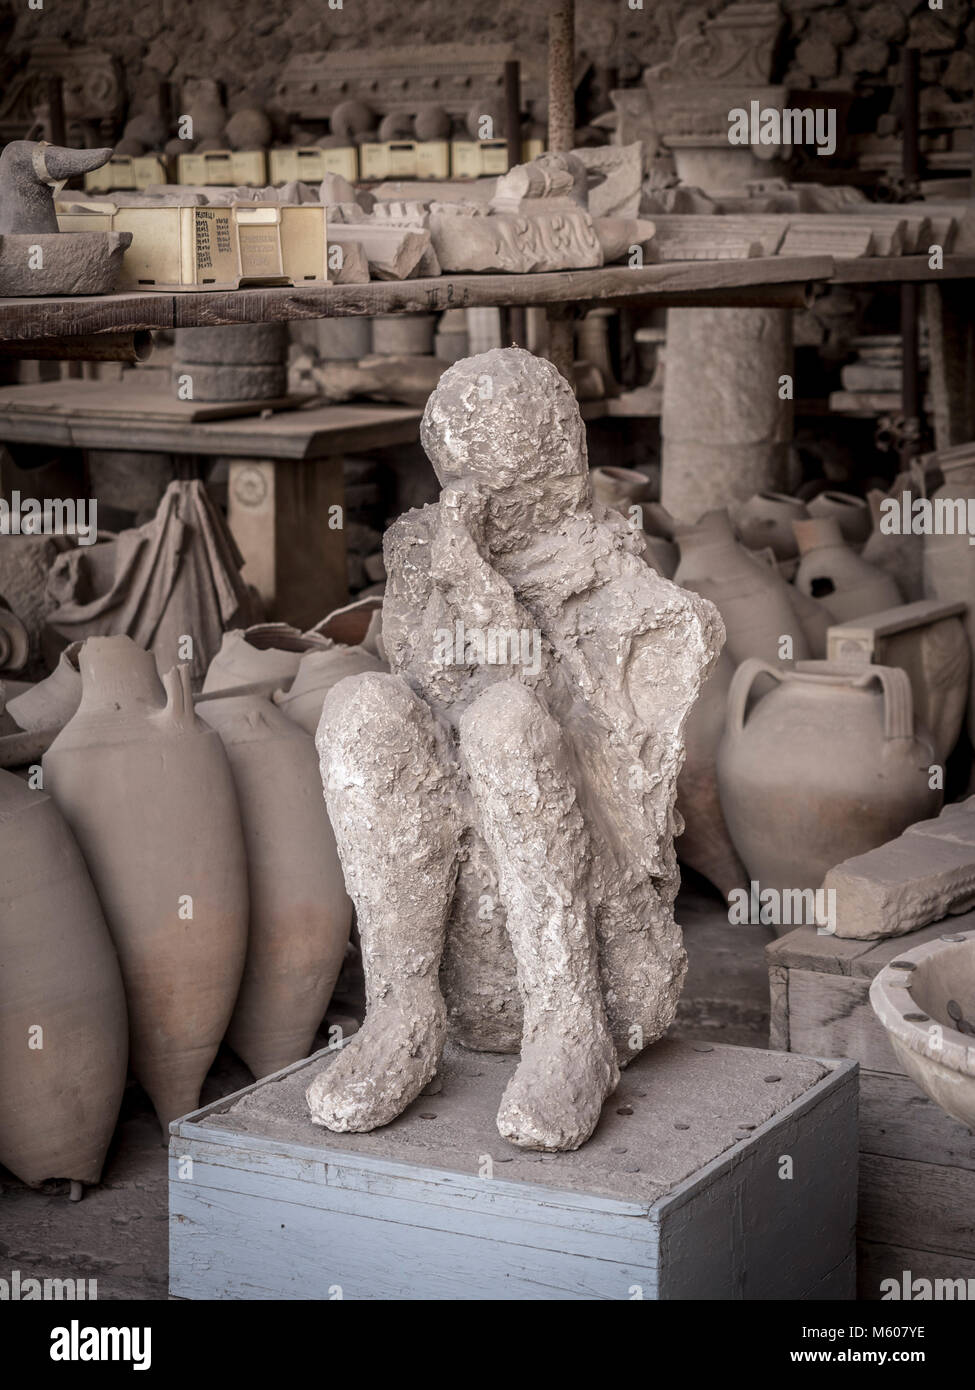 Body cast on display with excavated artefacts at Pompeii, Italy. Stock Photo